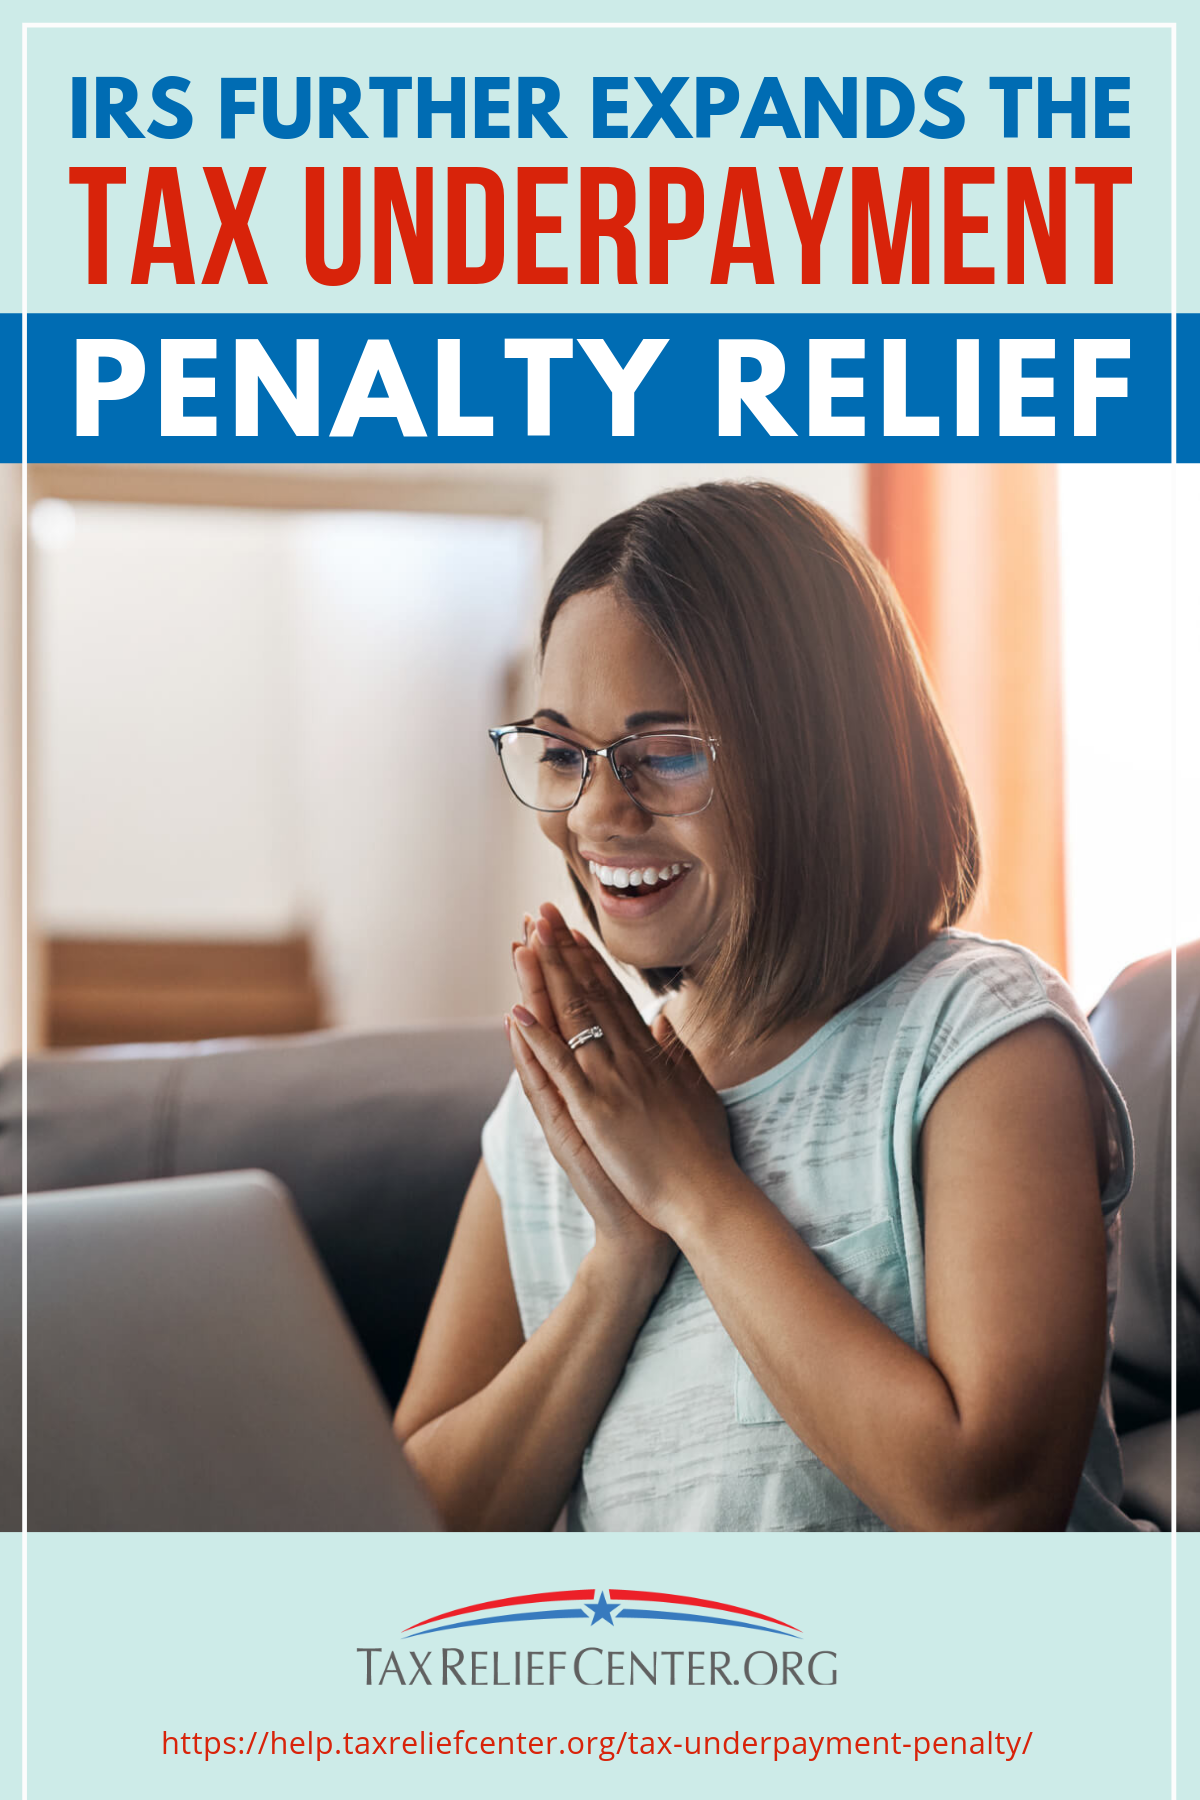 IRS Further Expands The Tax Underpayment Penalty Relief